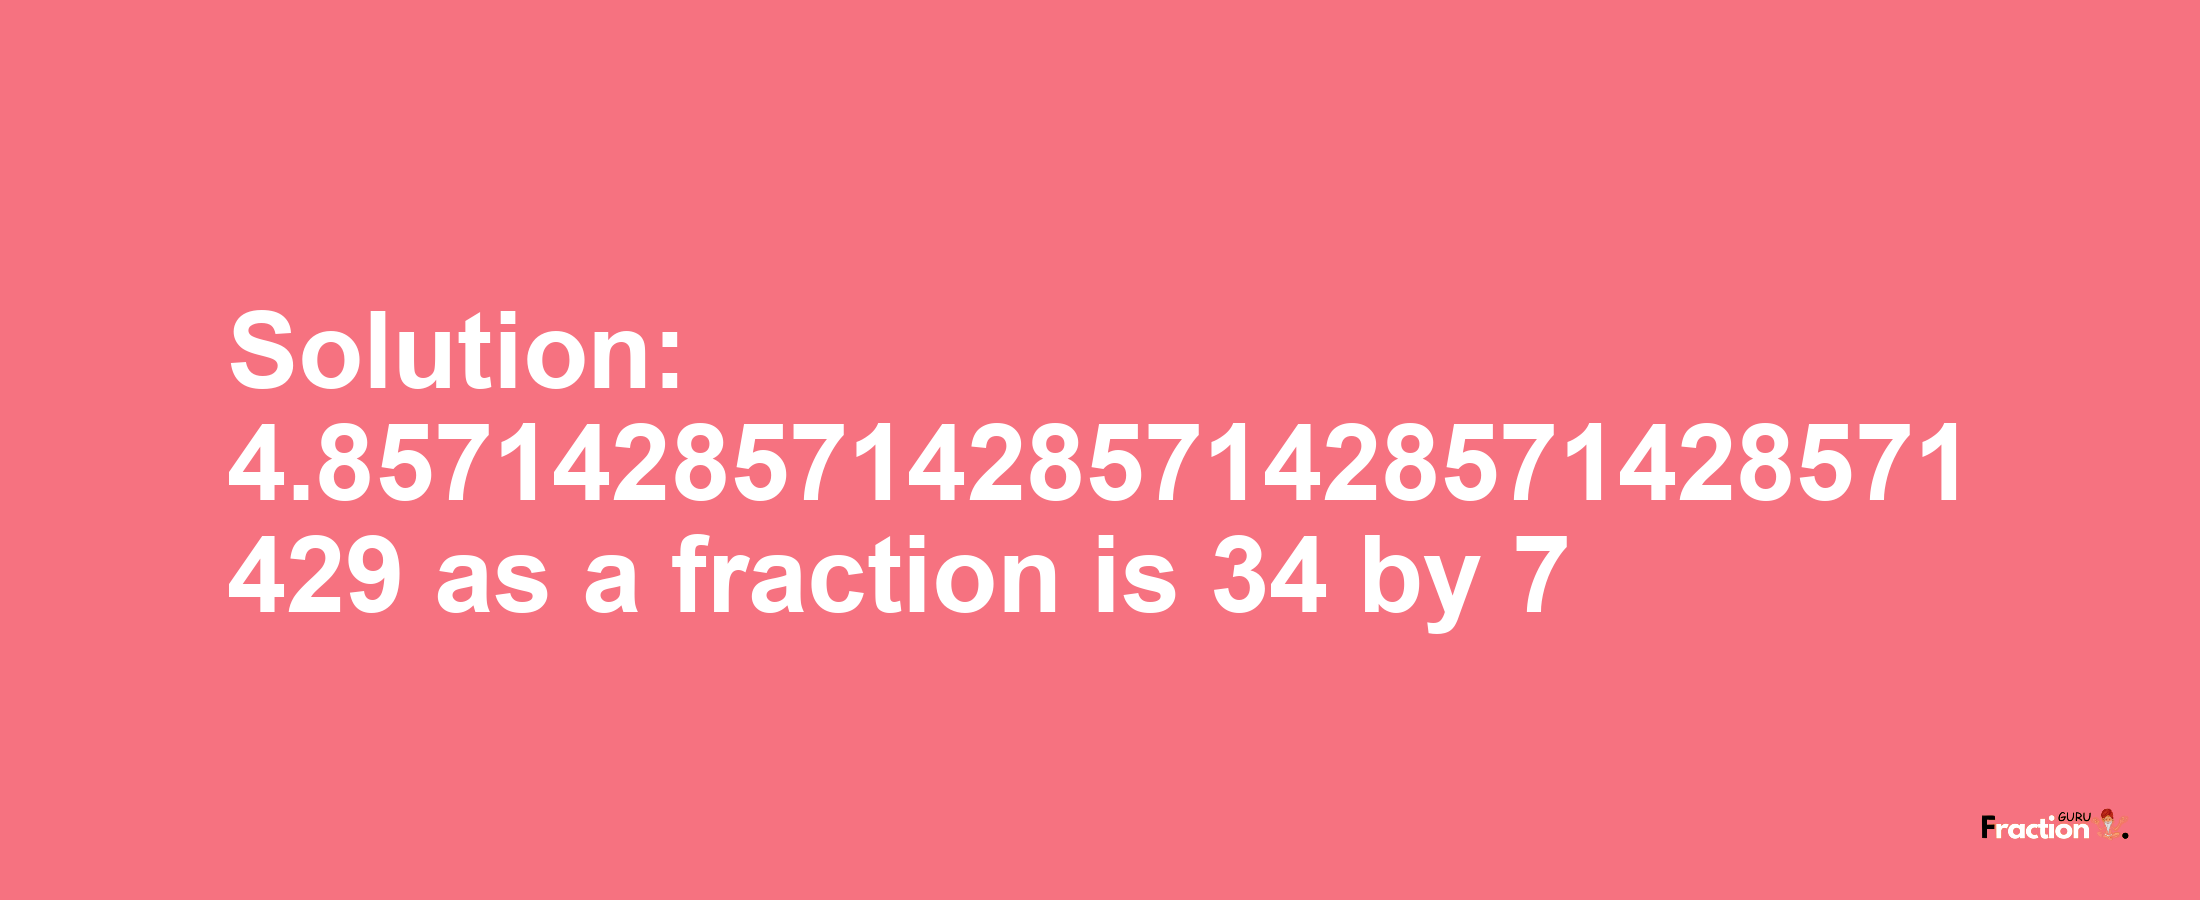 Solution:4.8571428571428571428571428571429 as a fraction is 34/7